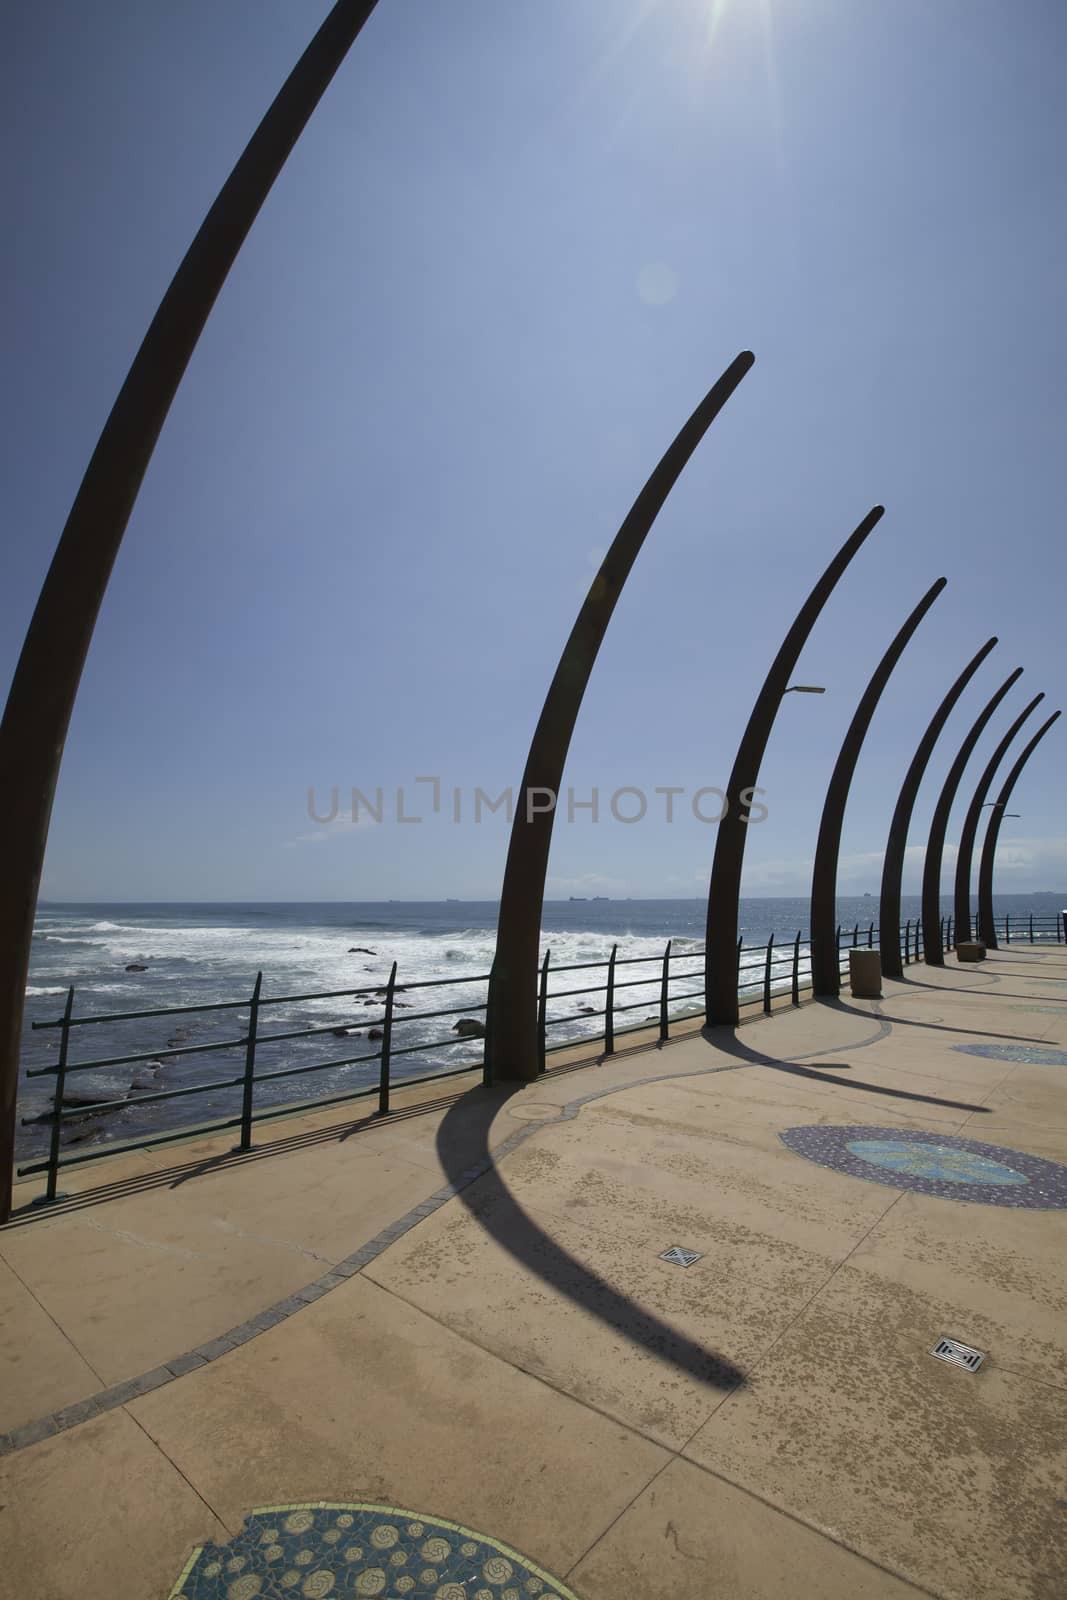 Beach side view from pier at Umhlanga Rocks in Durban, South Africa